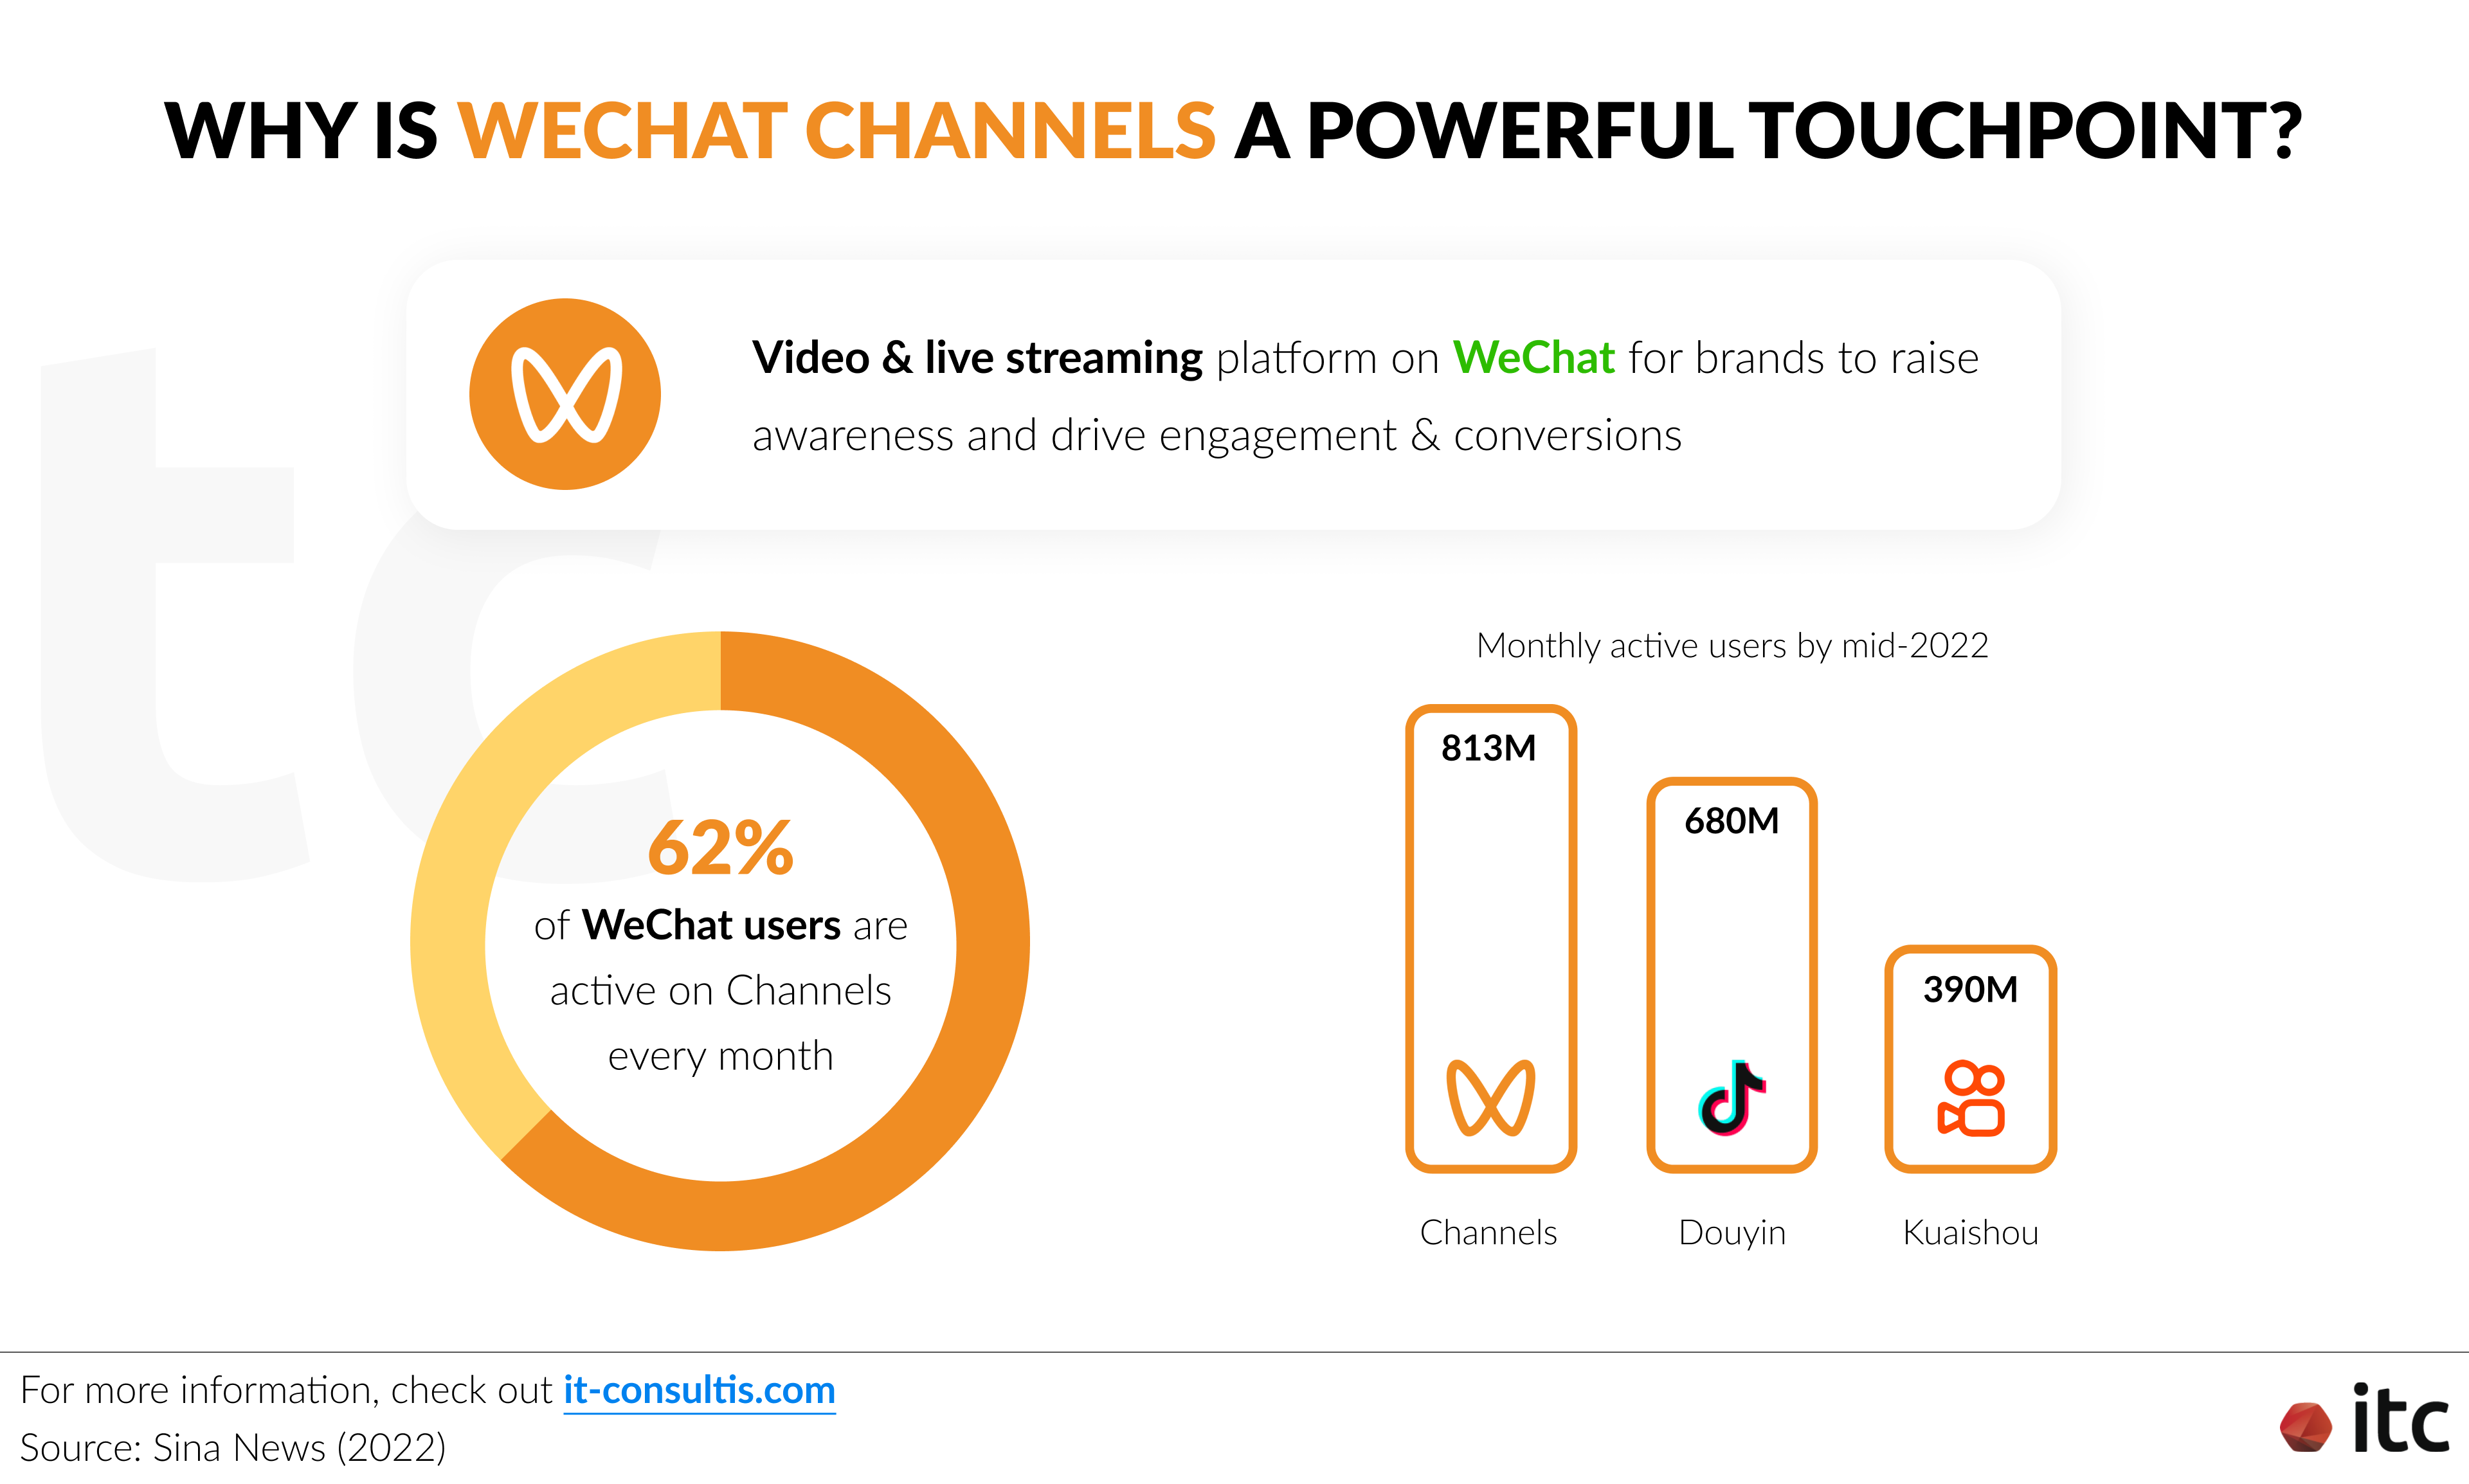 WeChat Channels a powerful touchpoint with 62% of WeChat users are active on Channels every month